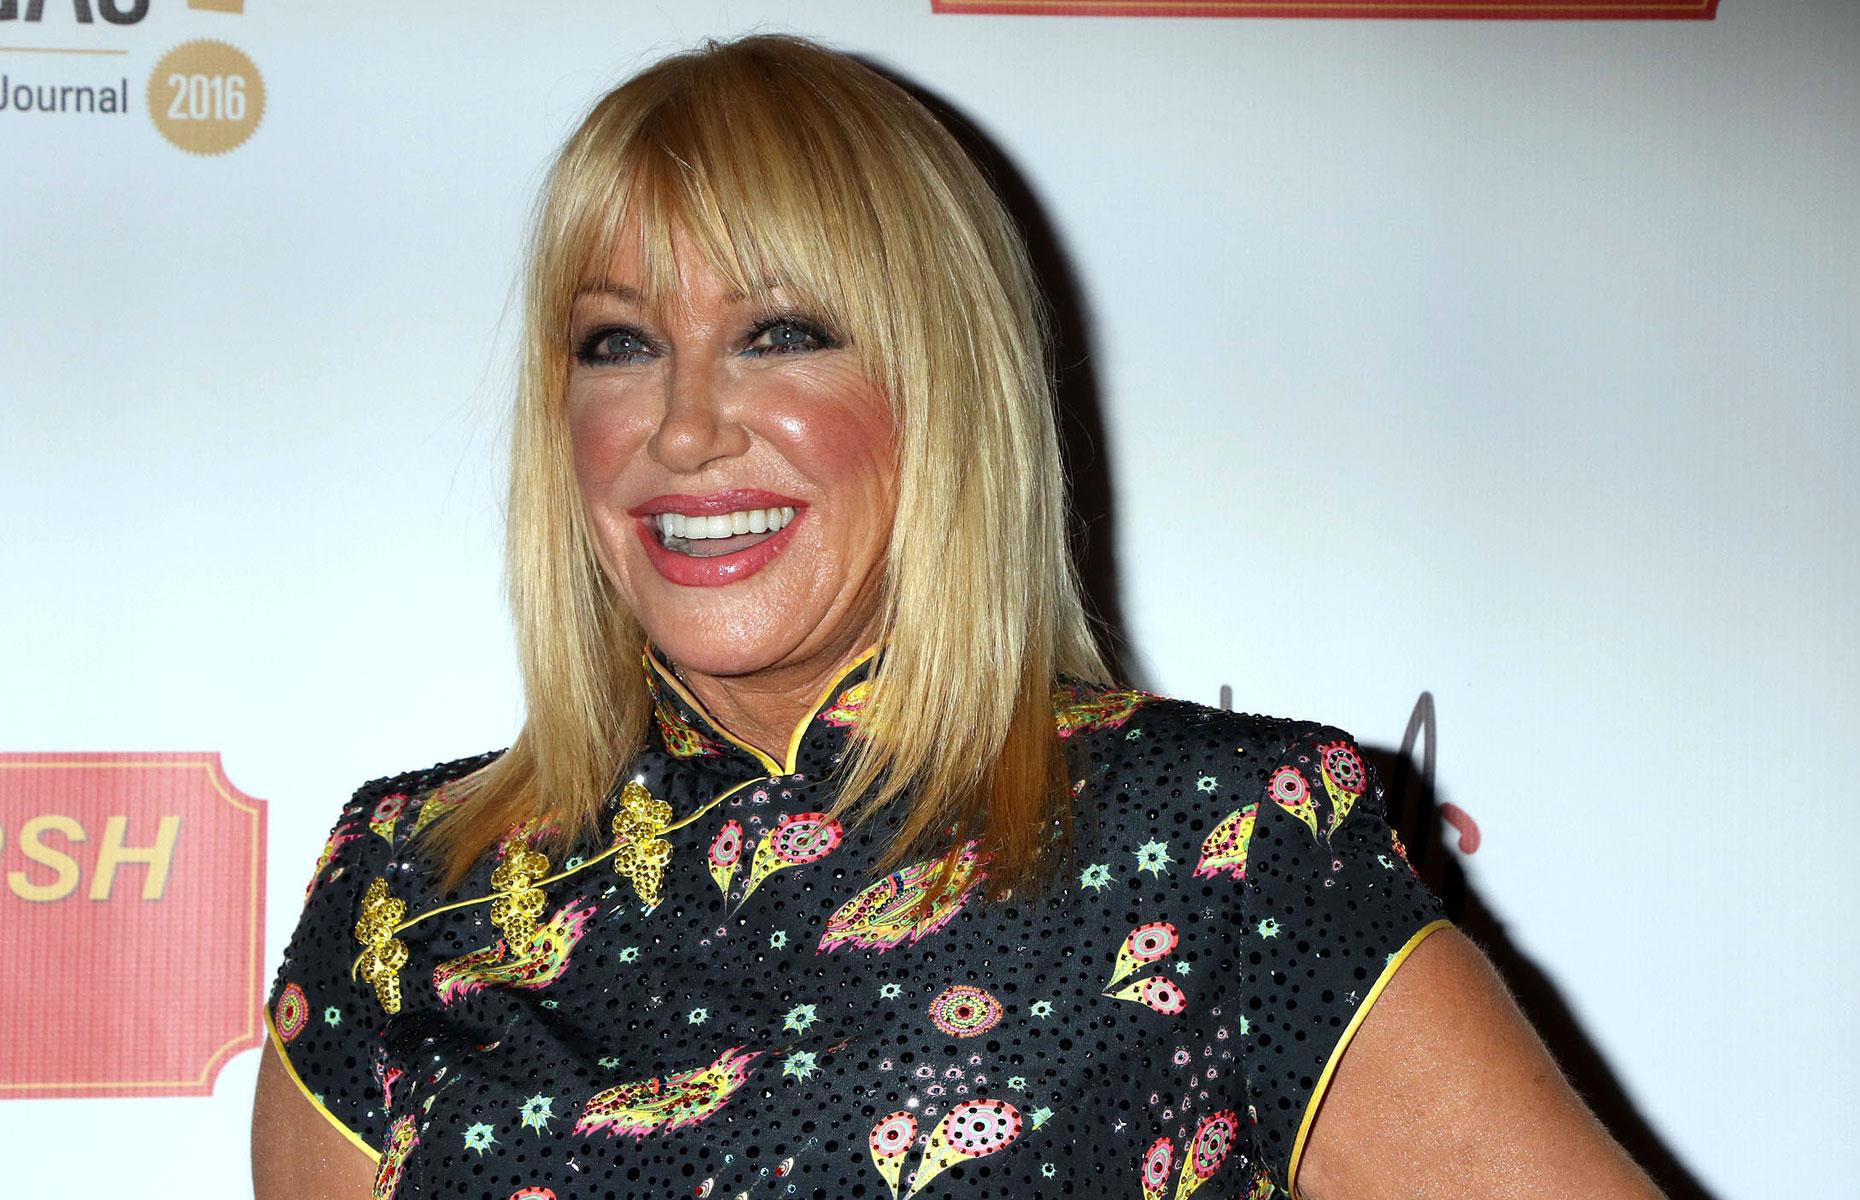 Suzanne Somers' Suzanne's Kitchen meal prep business 